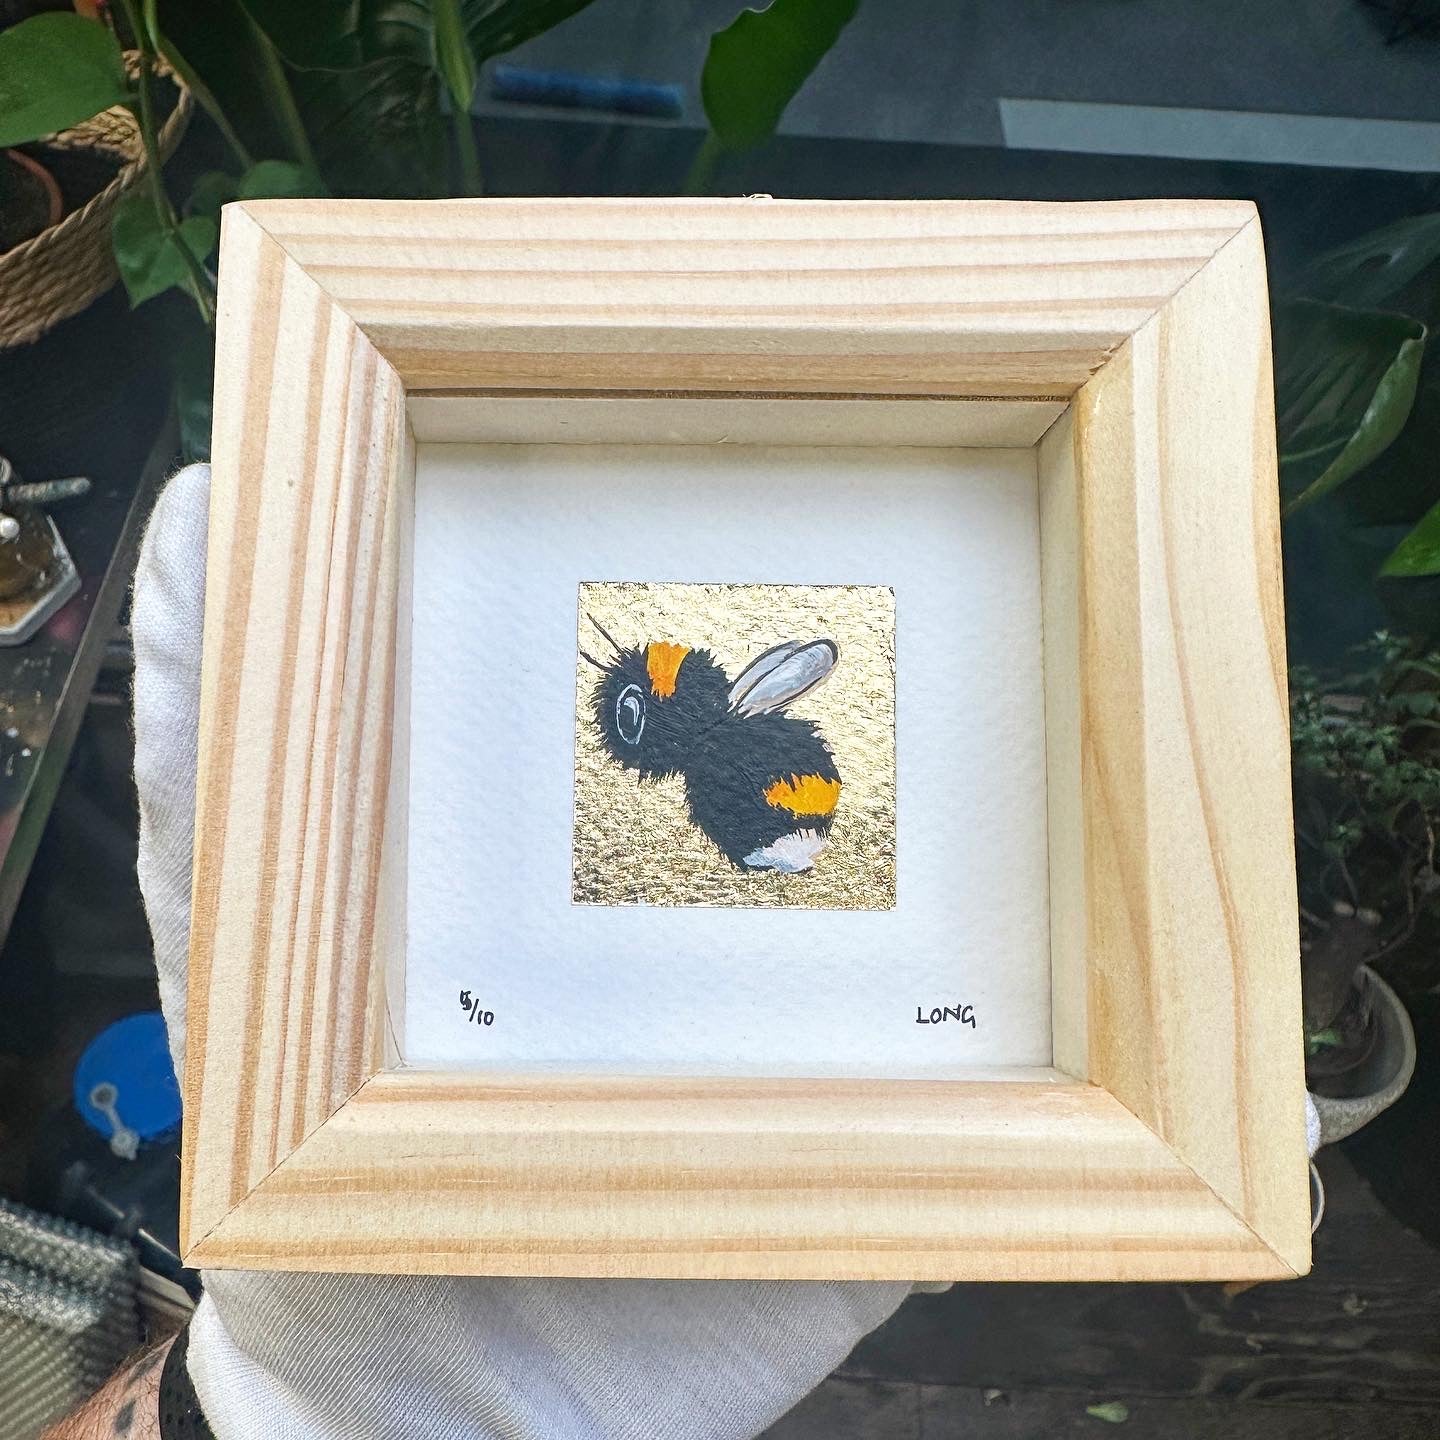 5/10 23CT GOLD LEAF TINY BEE